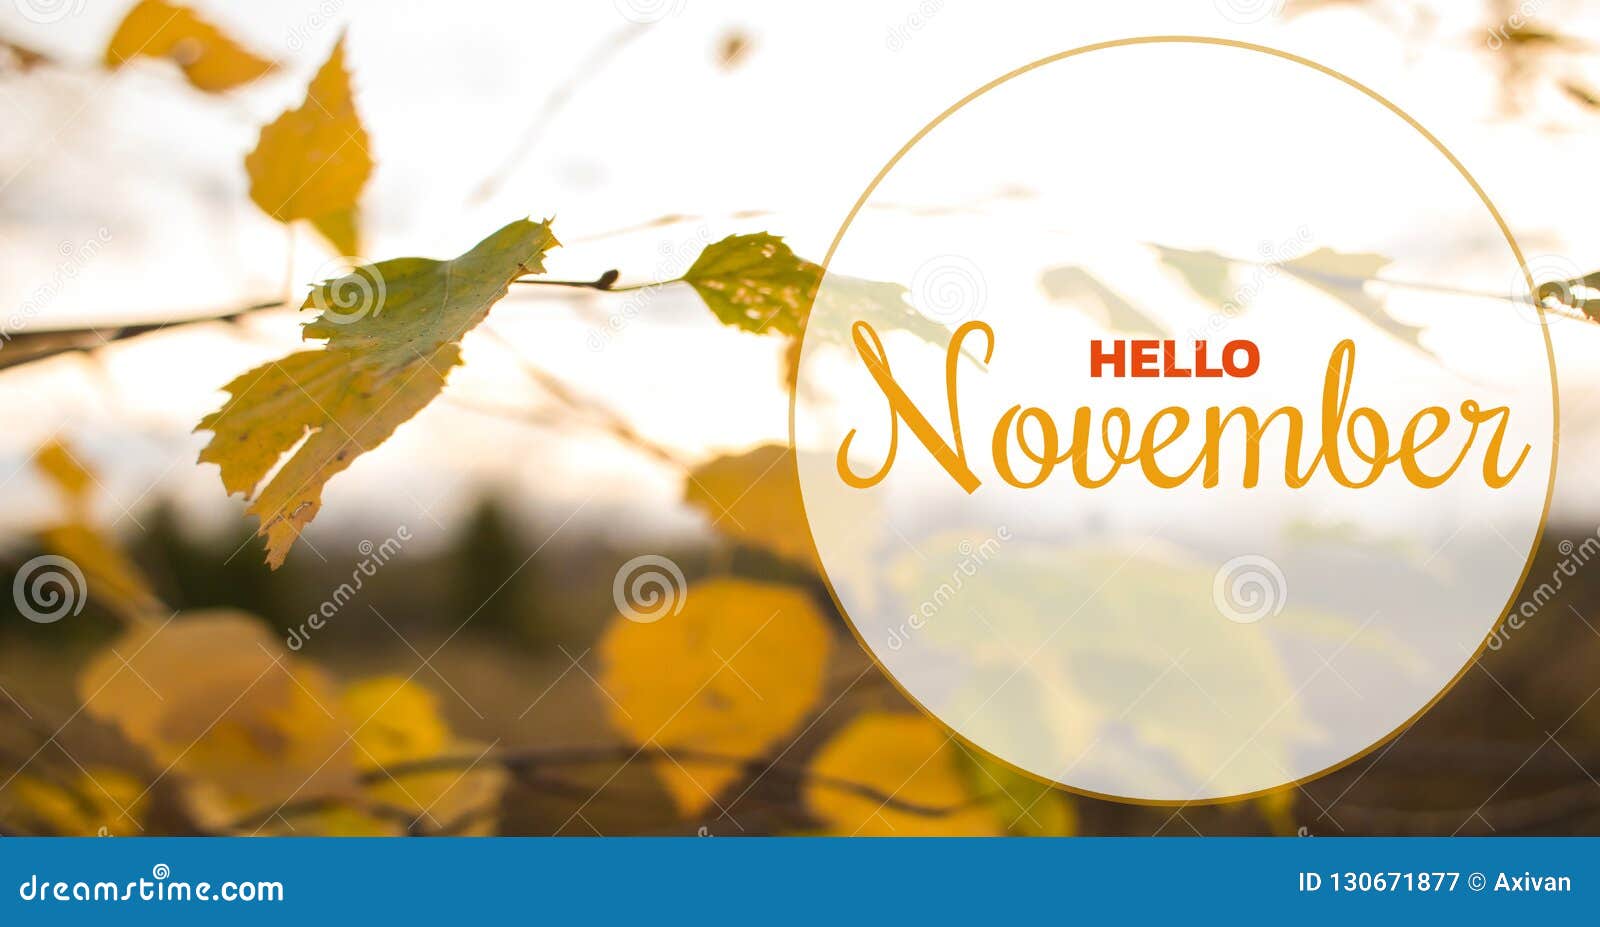 hello november autumn composition. yellow and orange leaves on sky background